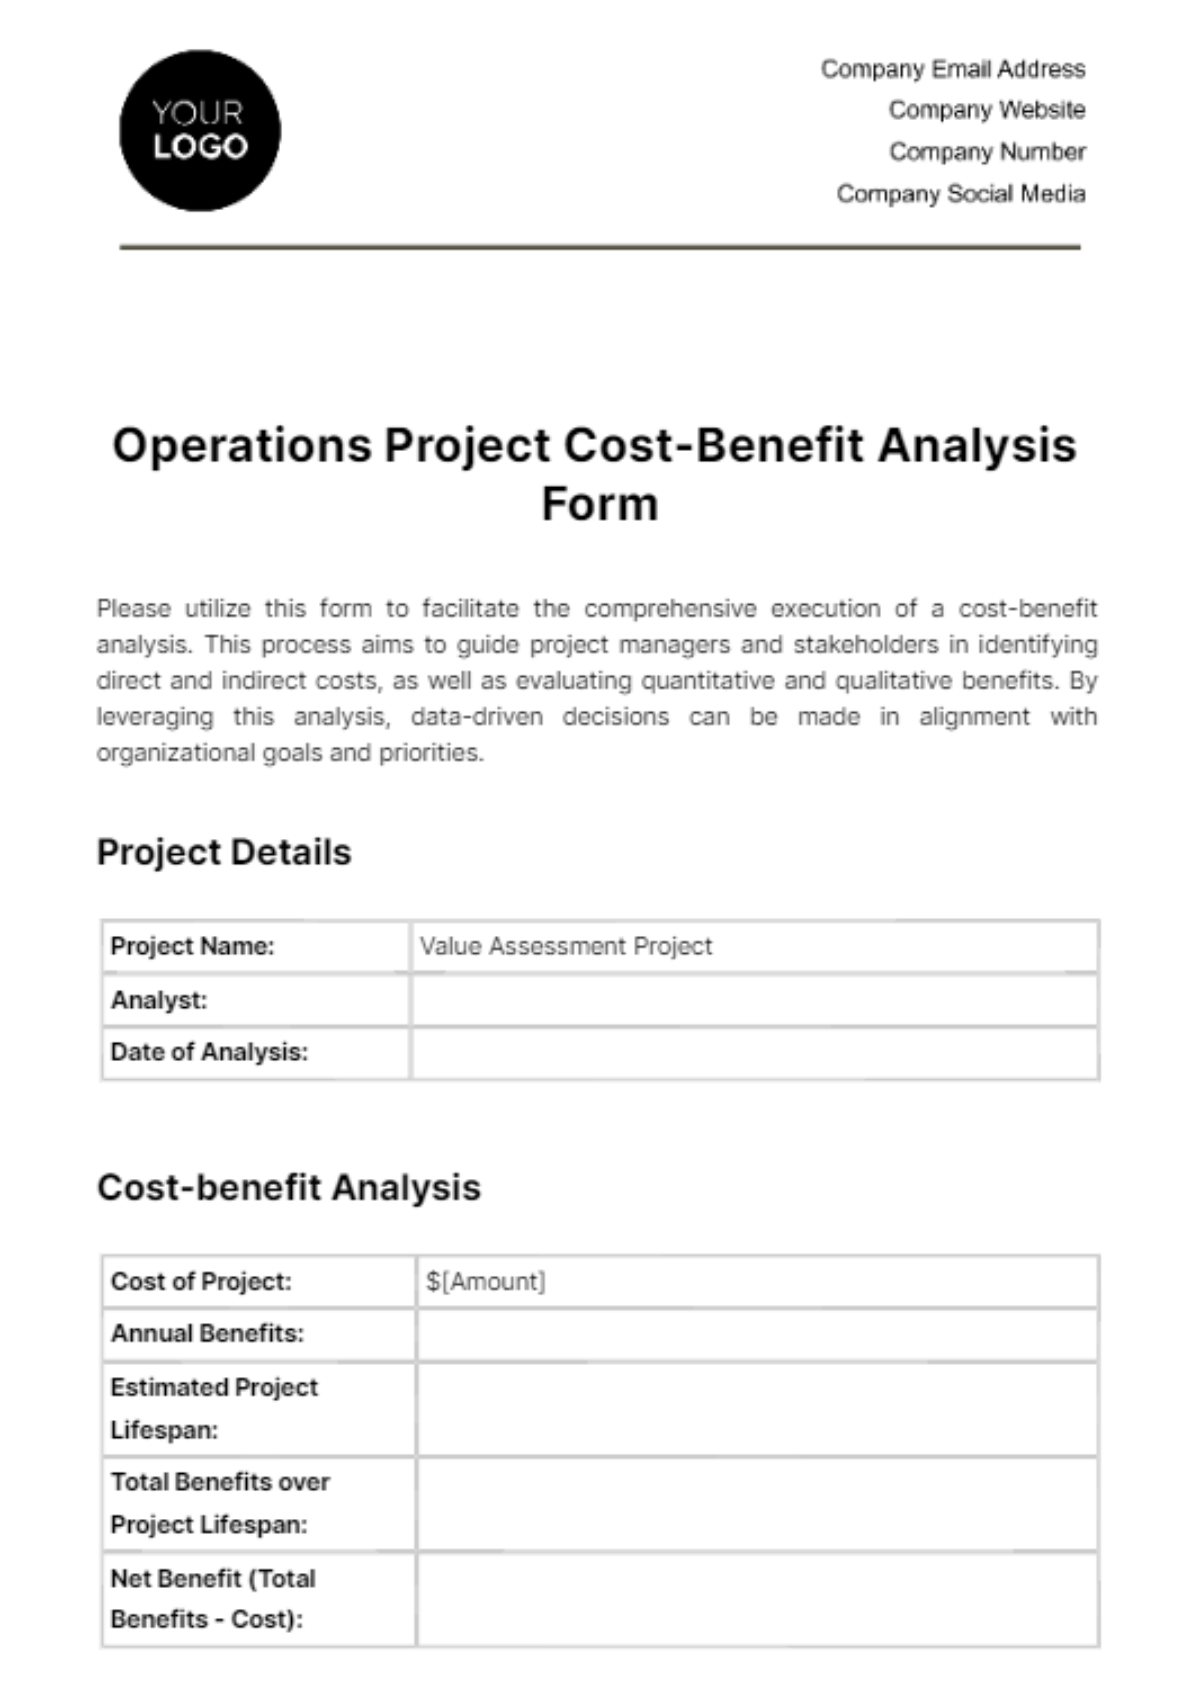 Free Operations Project Cost-Benefit Analysis Form Template